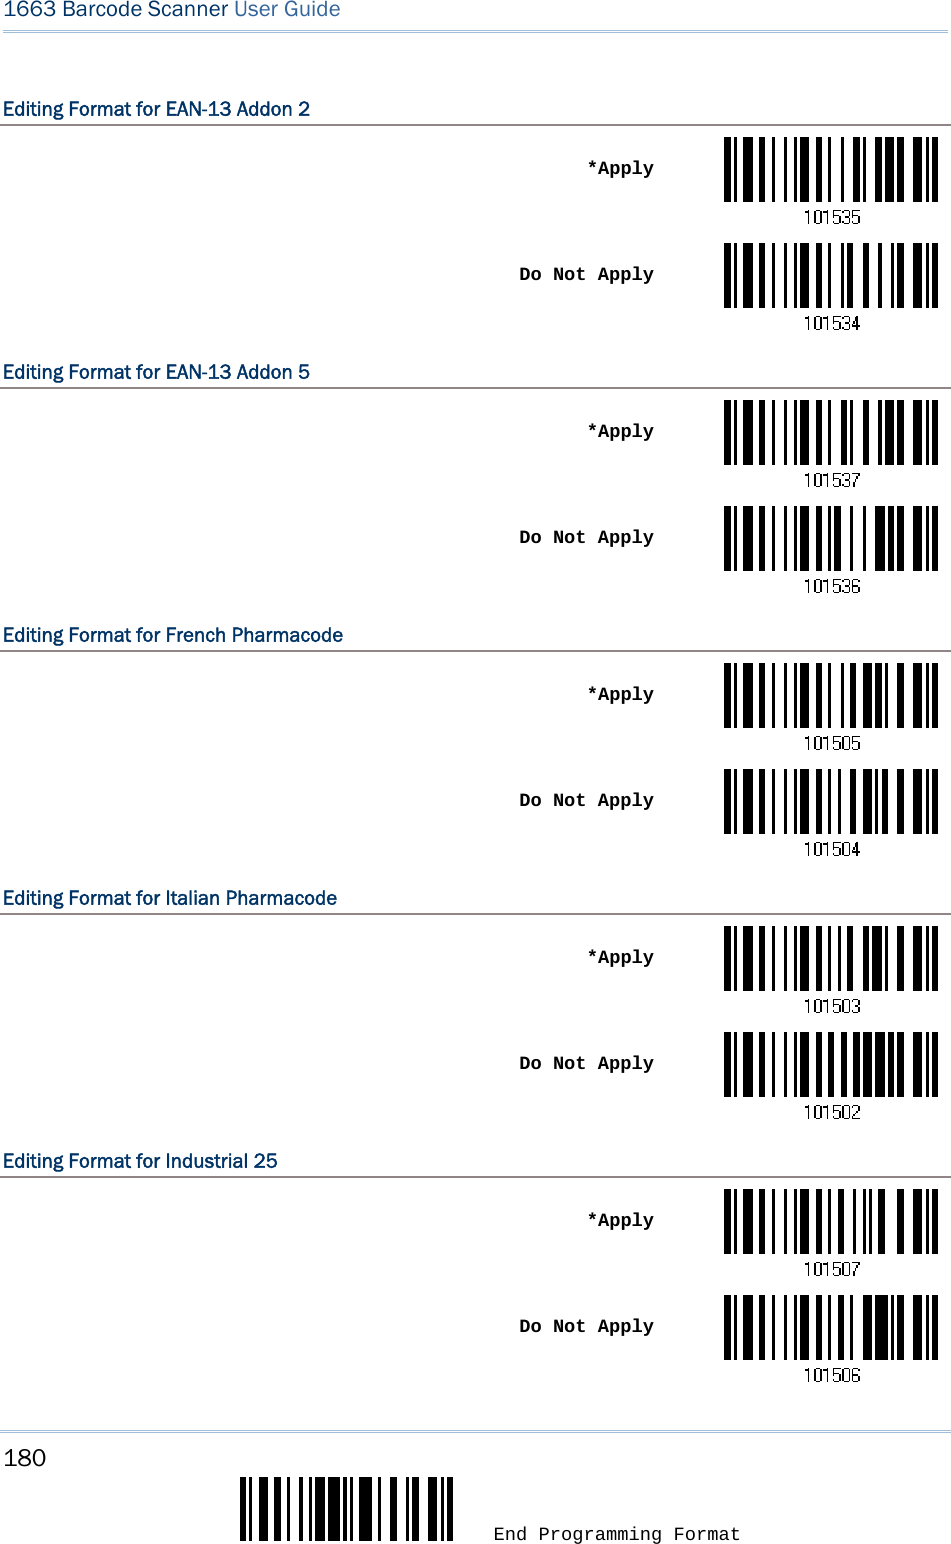 180  End Programming Format 1663 Barcode Scanner User Guide  Editing Format for EAN-13 Addon 2  *Apply Do Not ApplyEditing Format for EAN-13 Addon 5  *Apply Do Not ApplyEditing Format for French Pharmacode  *Apply Do Not ApplyEditing Format for Italian Pharmacode  *Apply Do Not ApplyEditing Format for Industrial 25  *Apply Do Not Apply